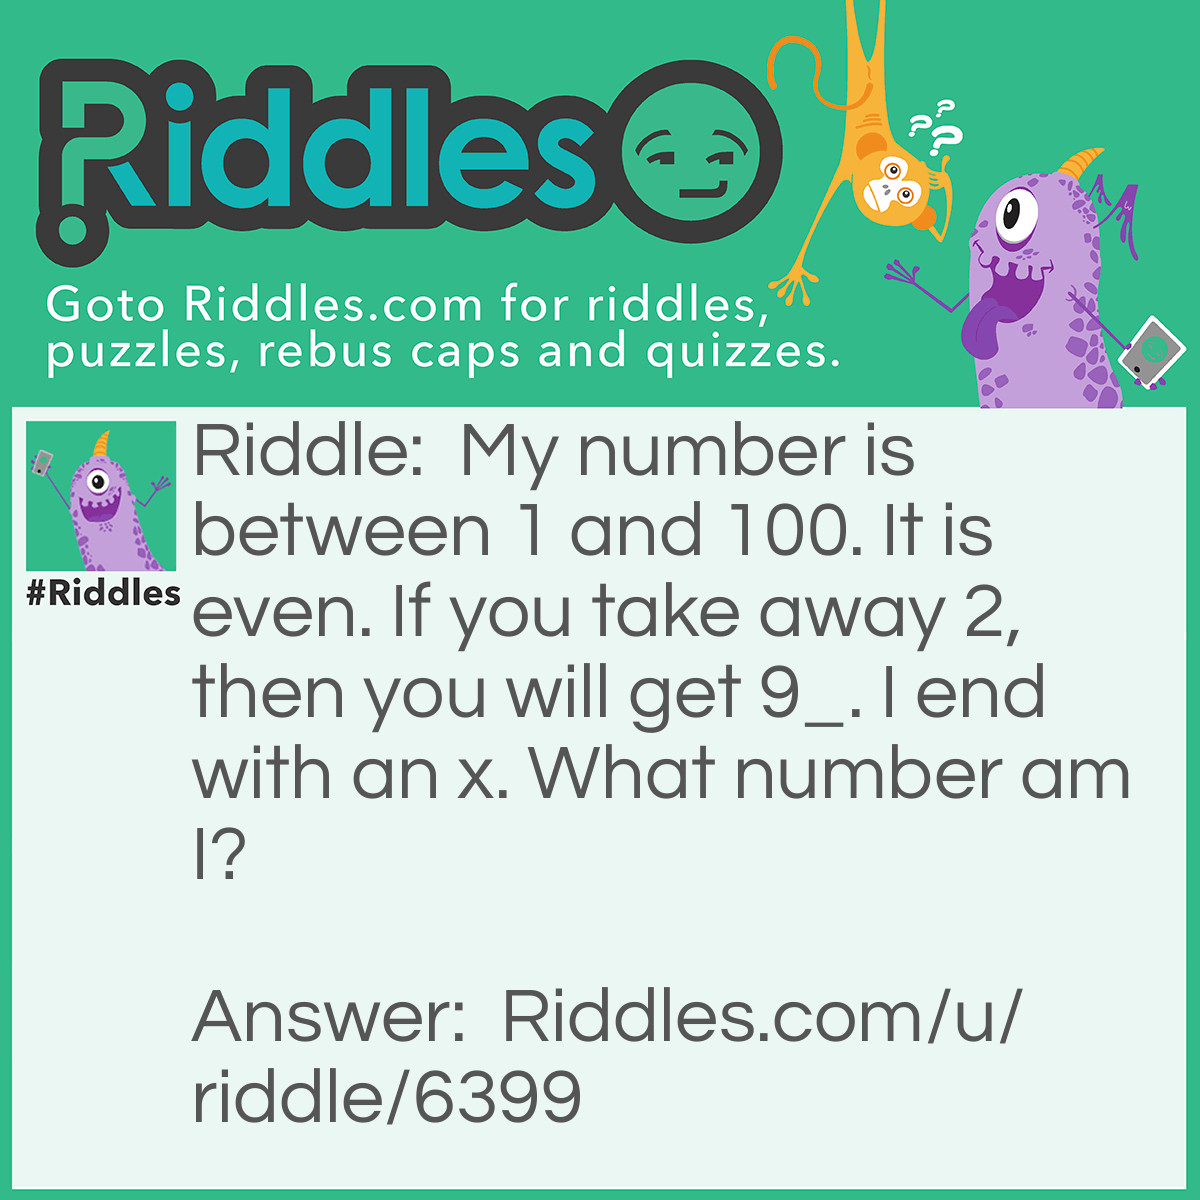 Riddle: My number is between 1 and 100. It is even. If you take away 2, then you will get 9_. I end with an x. What number am I? Answer: 96!